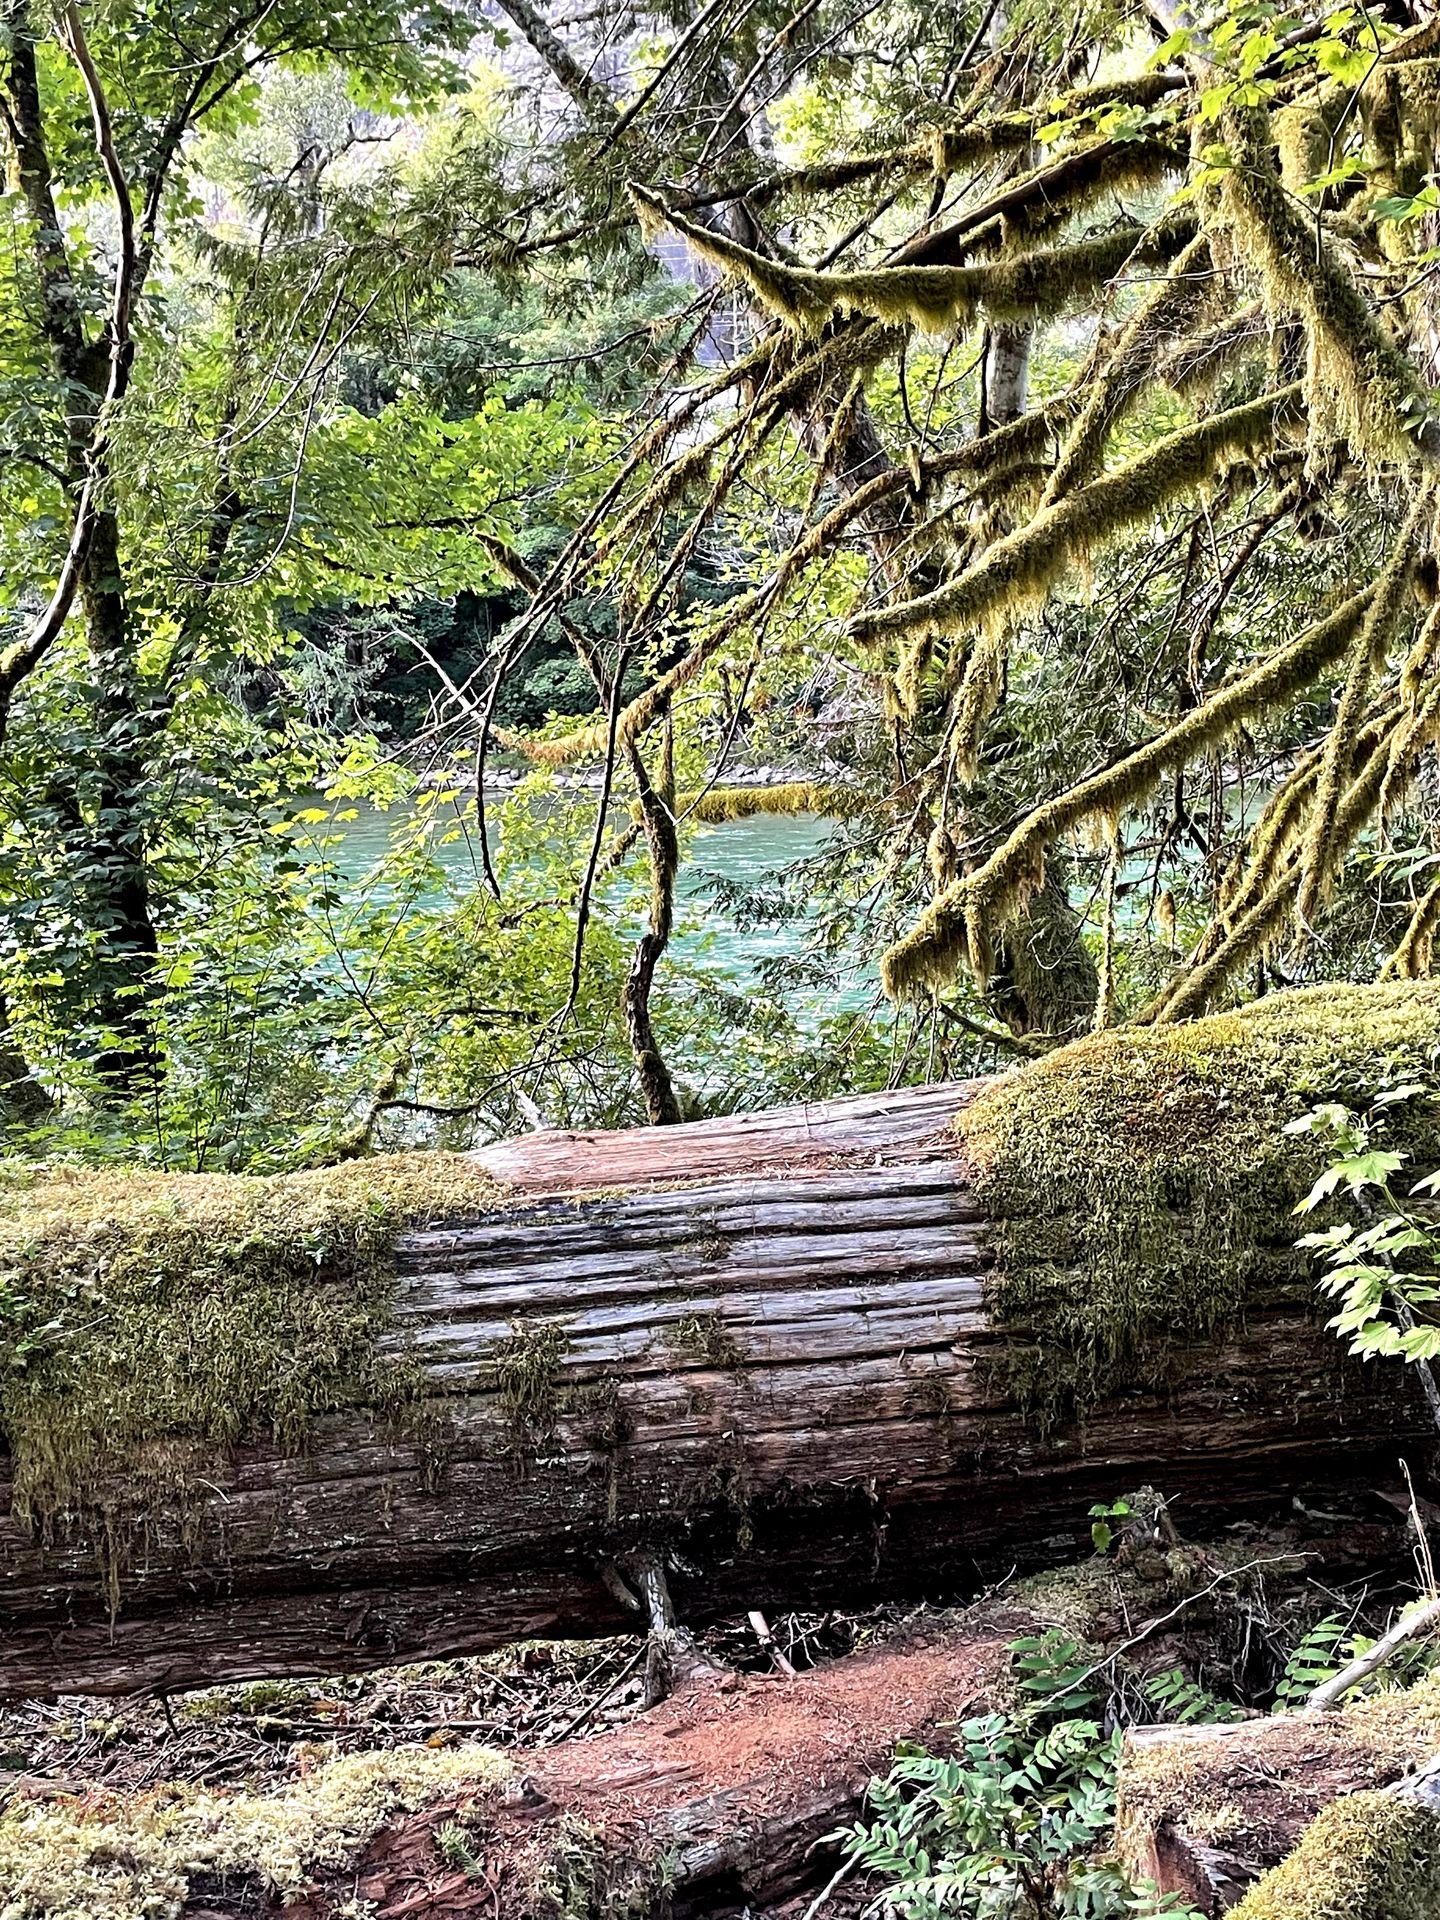 A log and tree branches covered in moss along the Trail of the Cedars